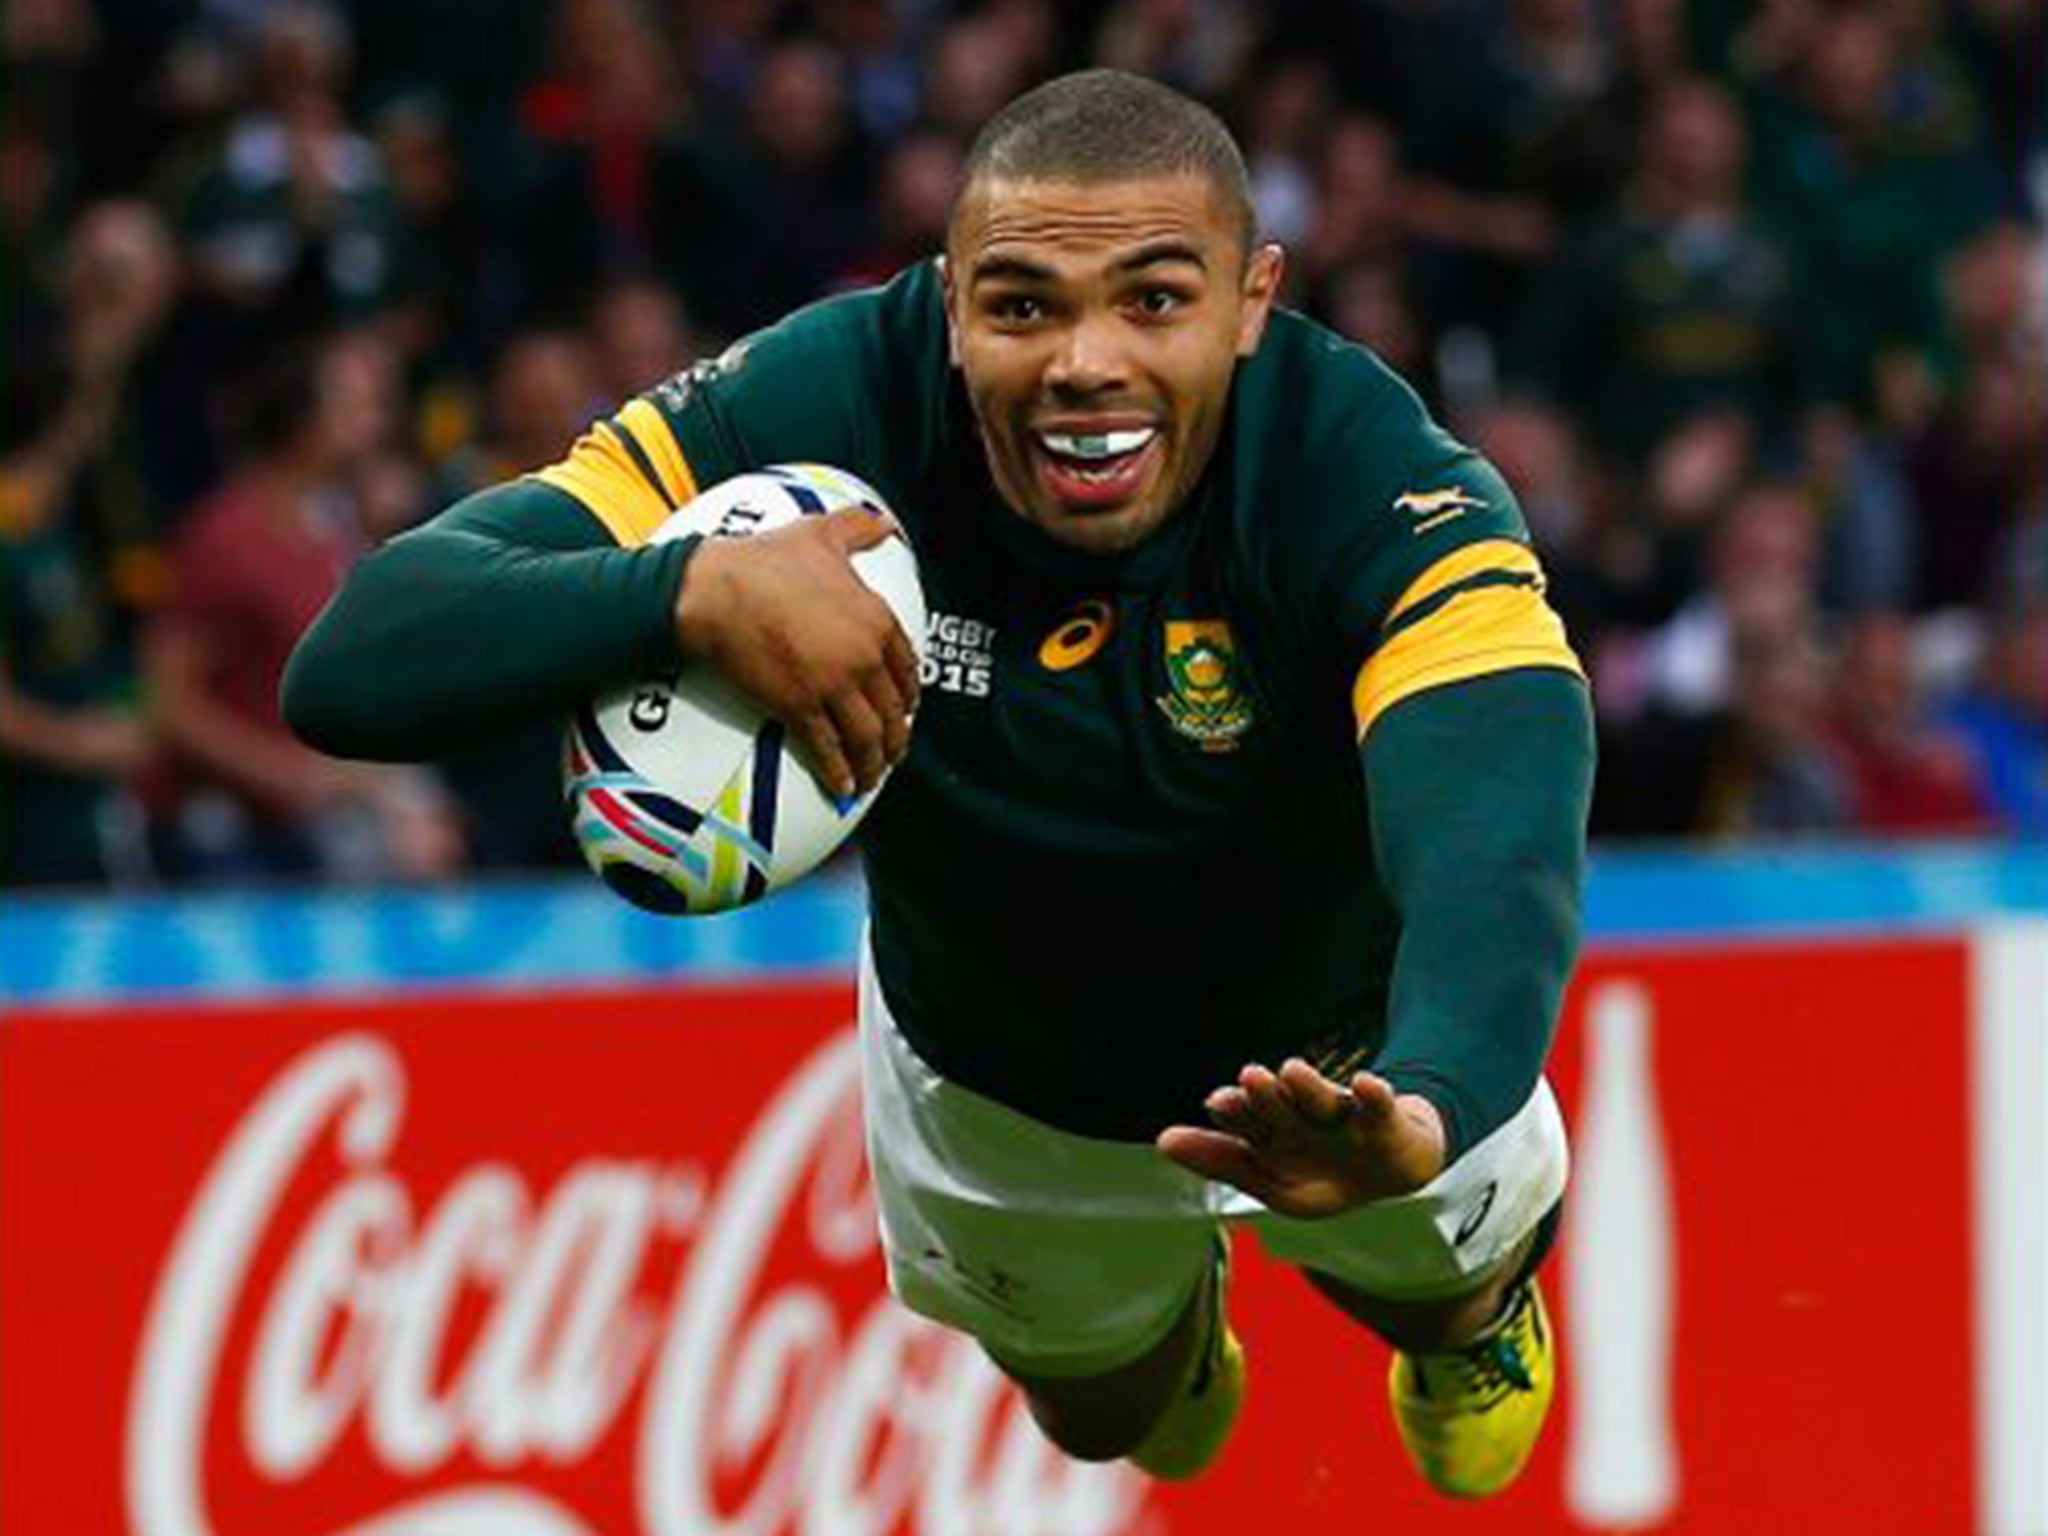 Bryan Habana scoring one of his five tries, against the United States in South Africa’s pool stage win